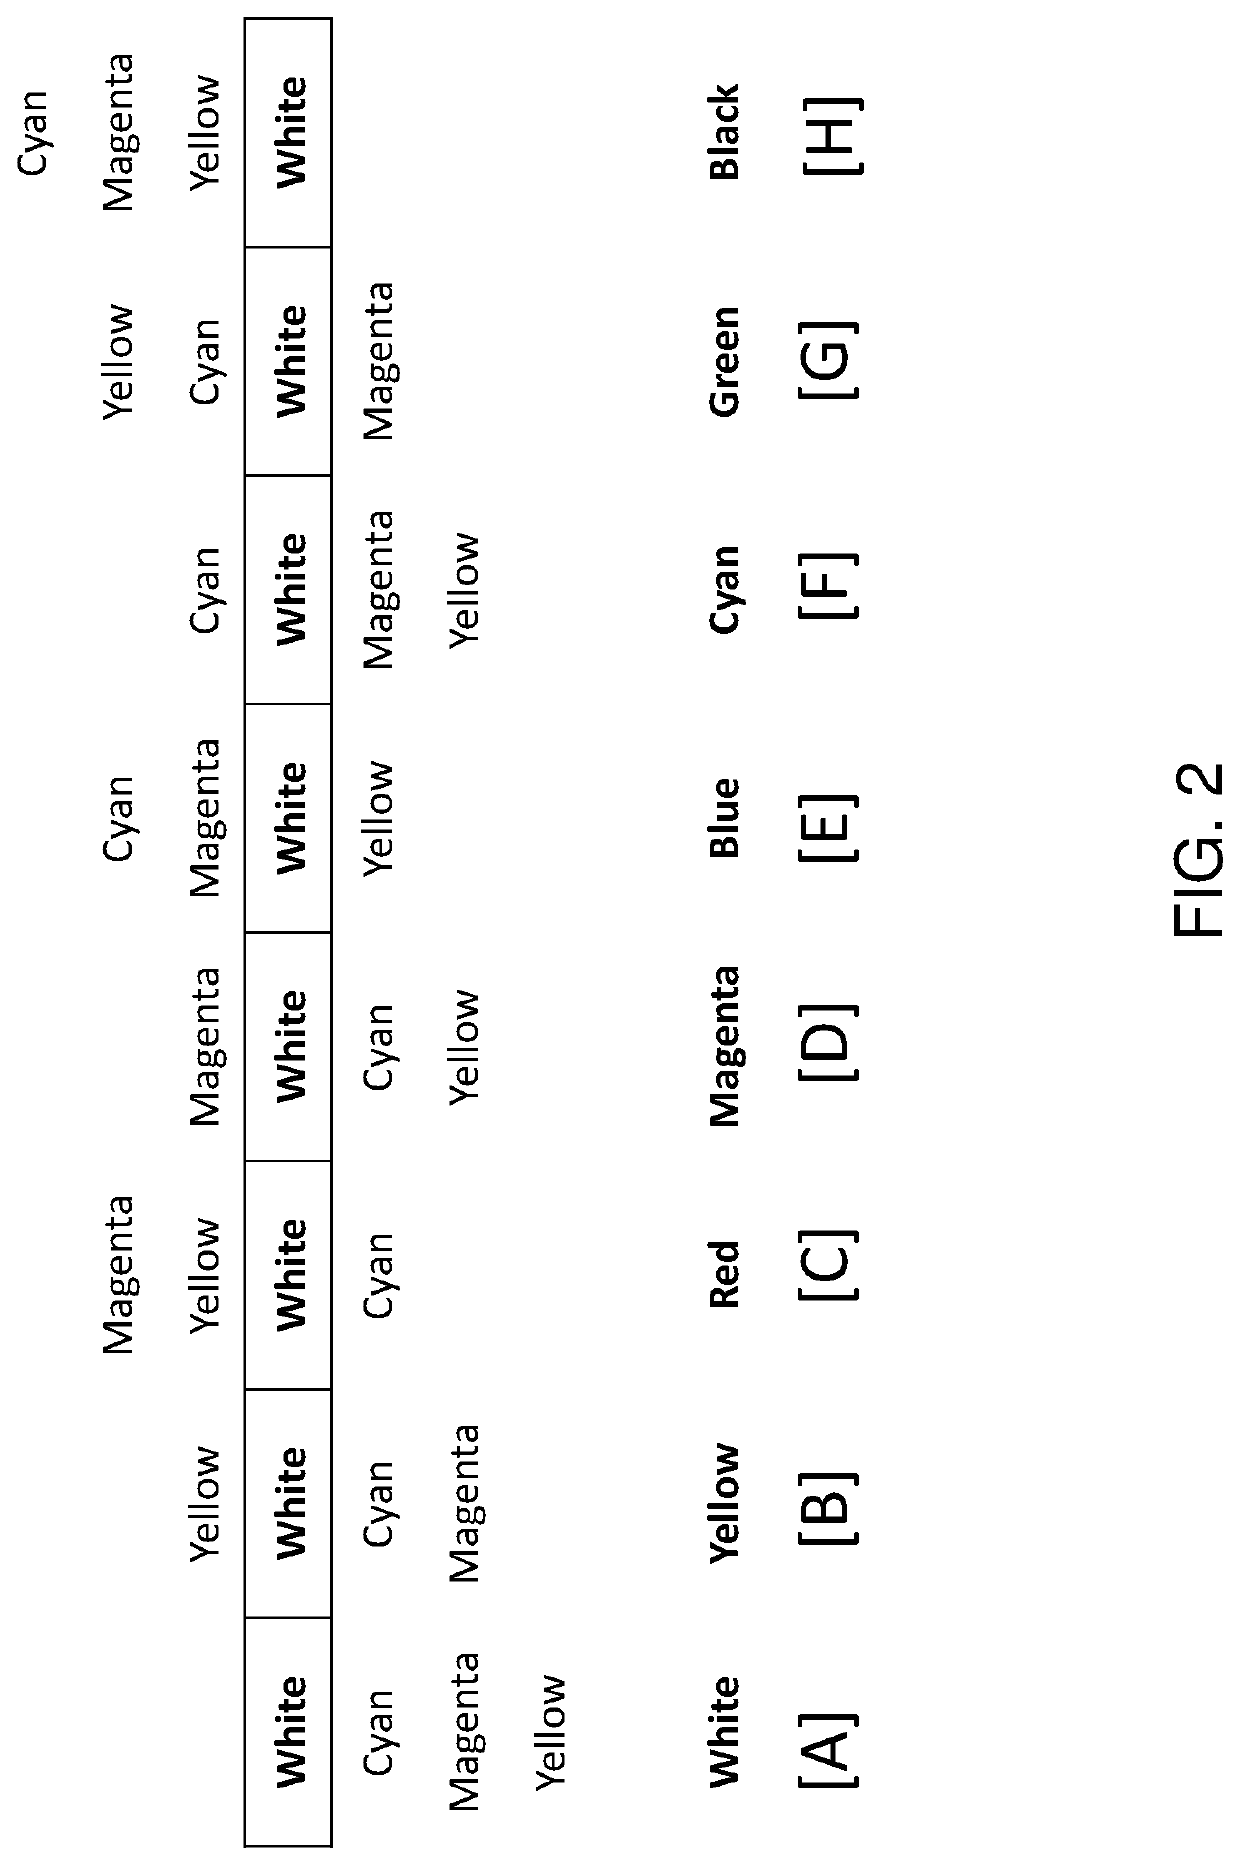 Drivers providing DC-balanced refresh sequences for color electrophoretic displays